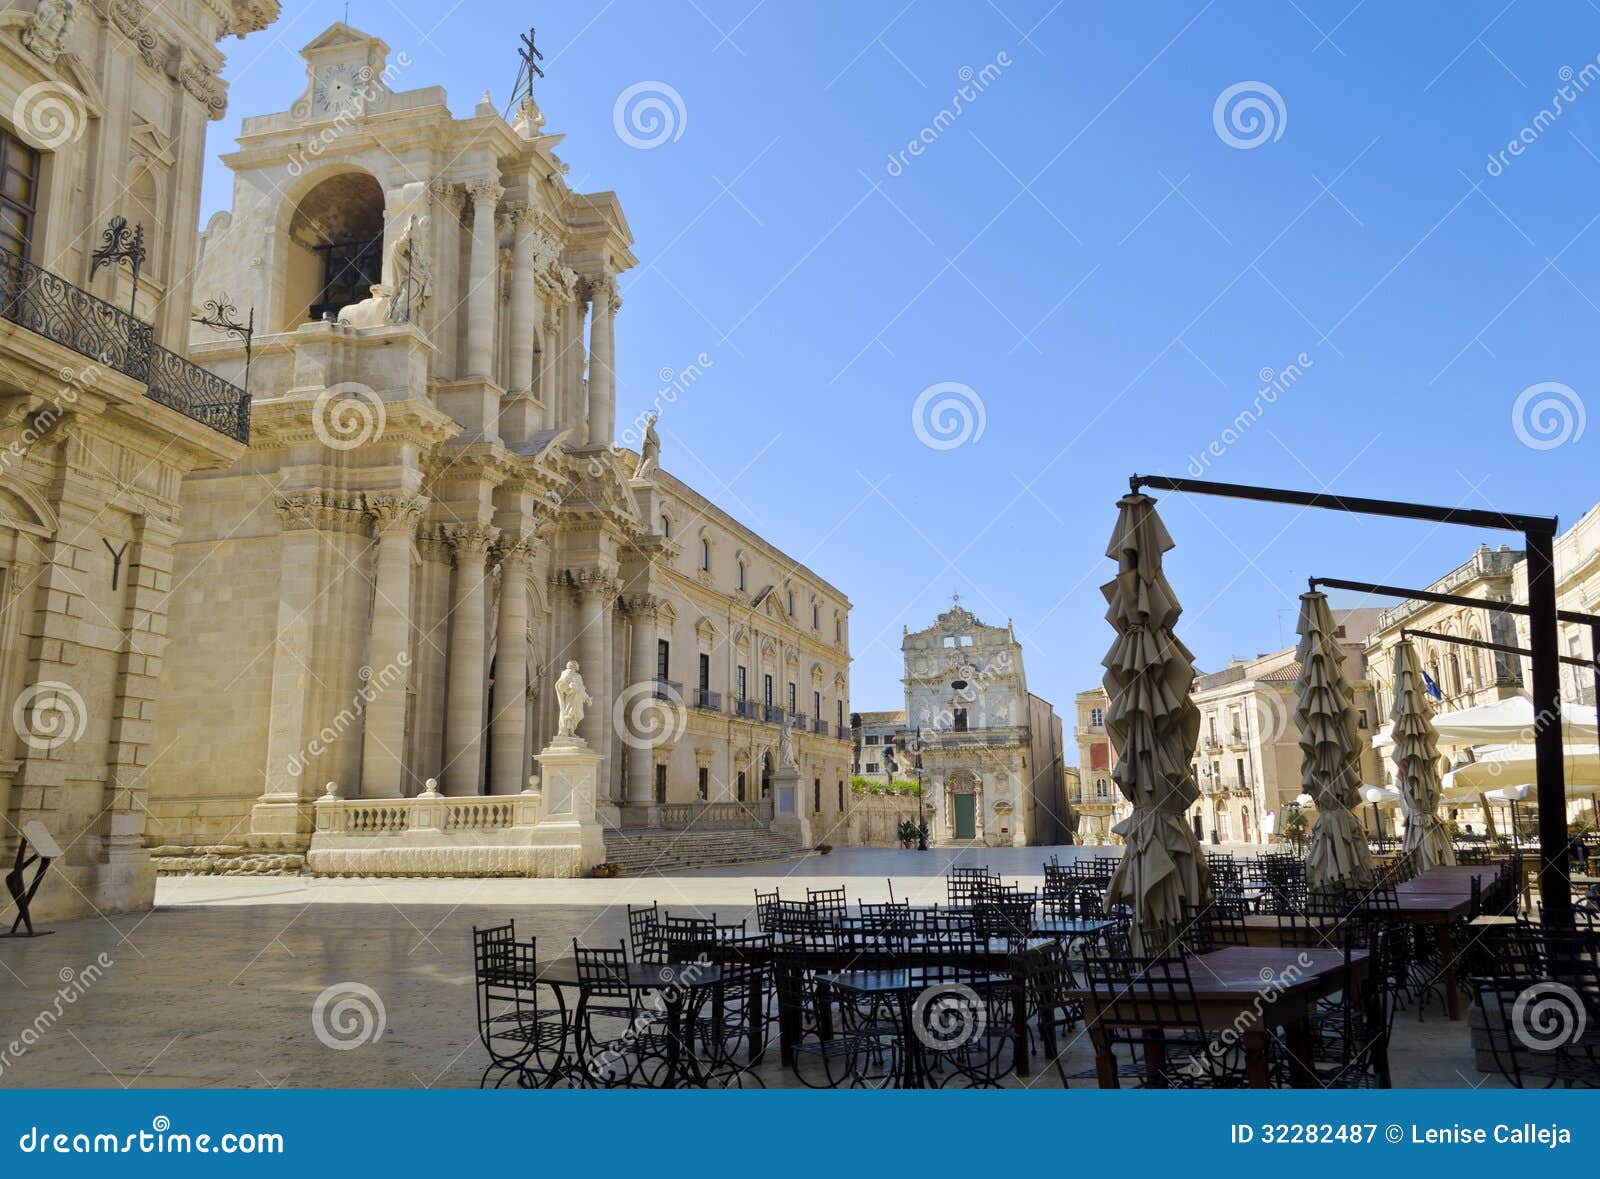 piazza duomo in siracusa - sicily, italy